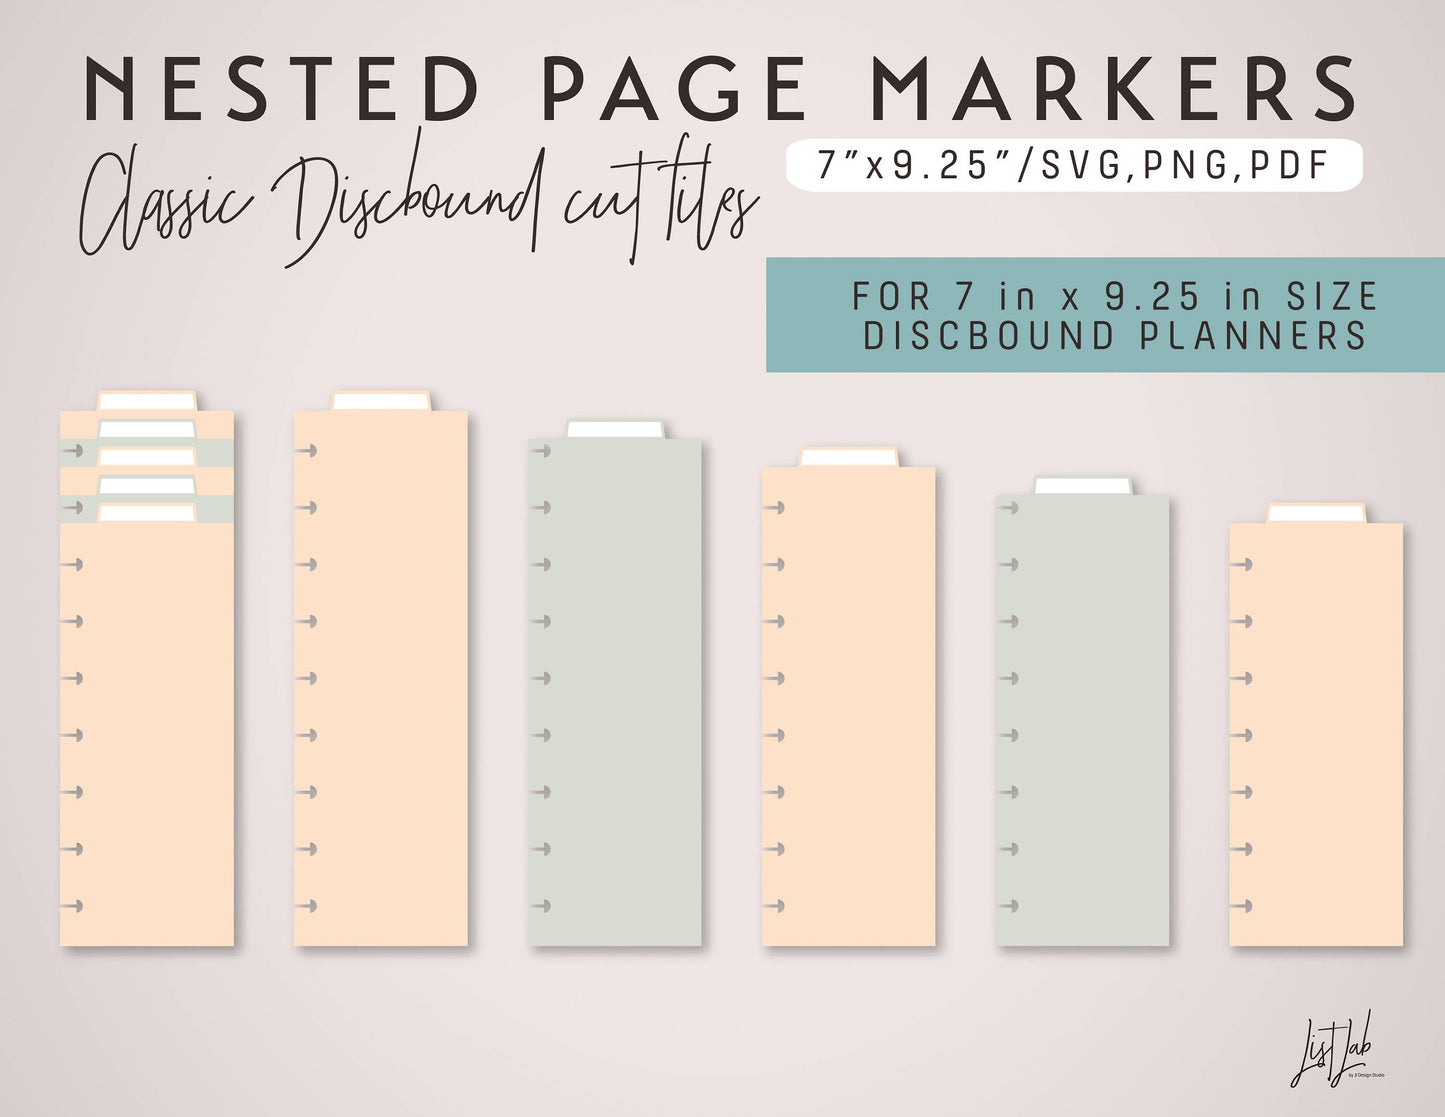 CLASSIC Disc 5 Nested Page Markers Cutting File Set